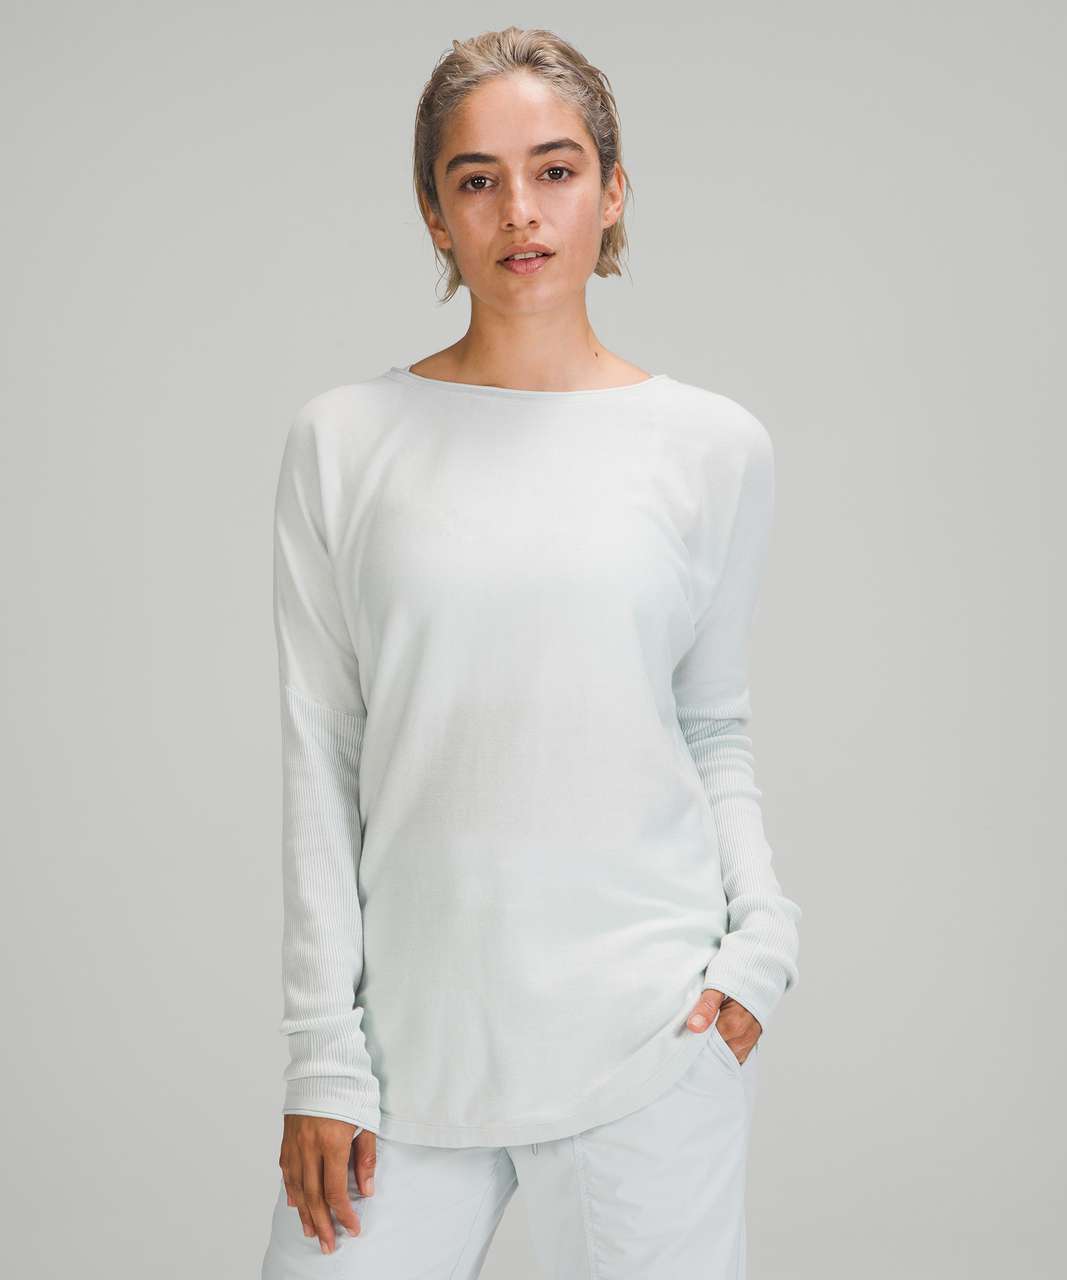 Lululemon Athletica Take It All In Sweater Heathered Tidewater